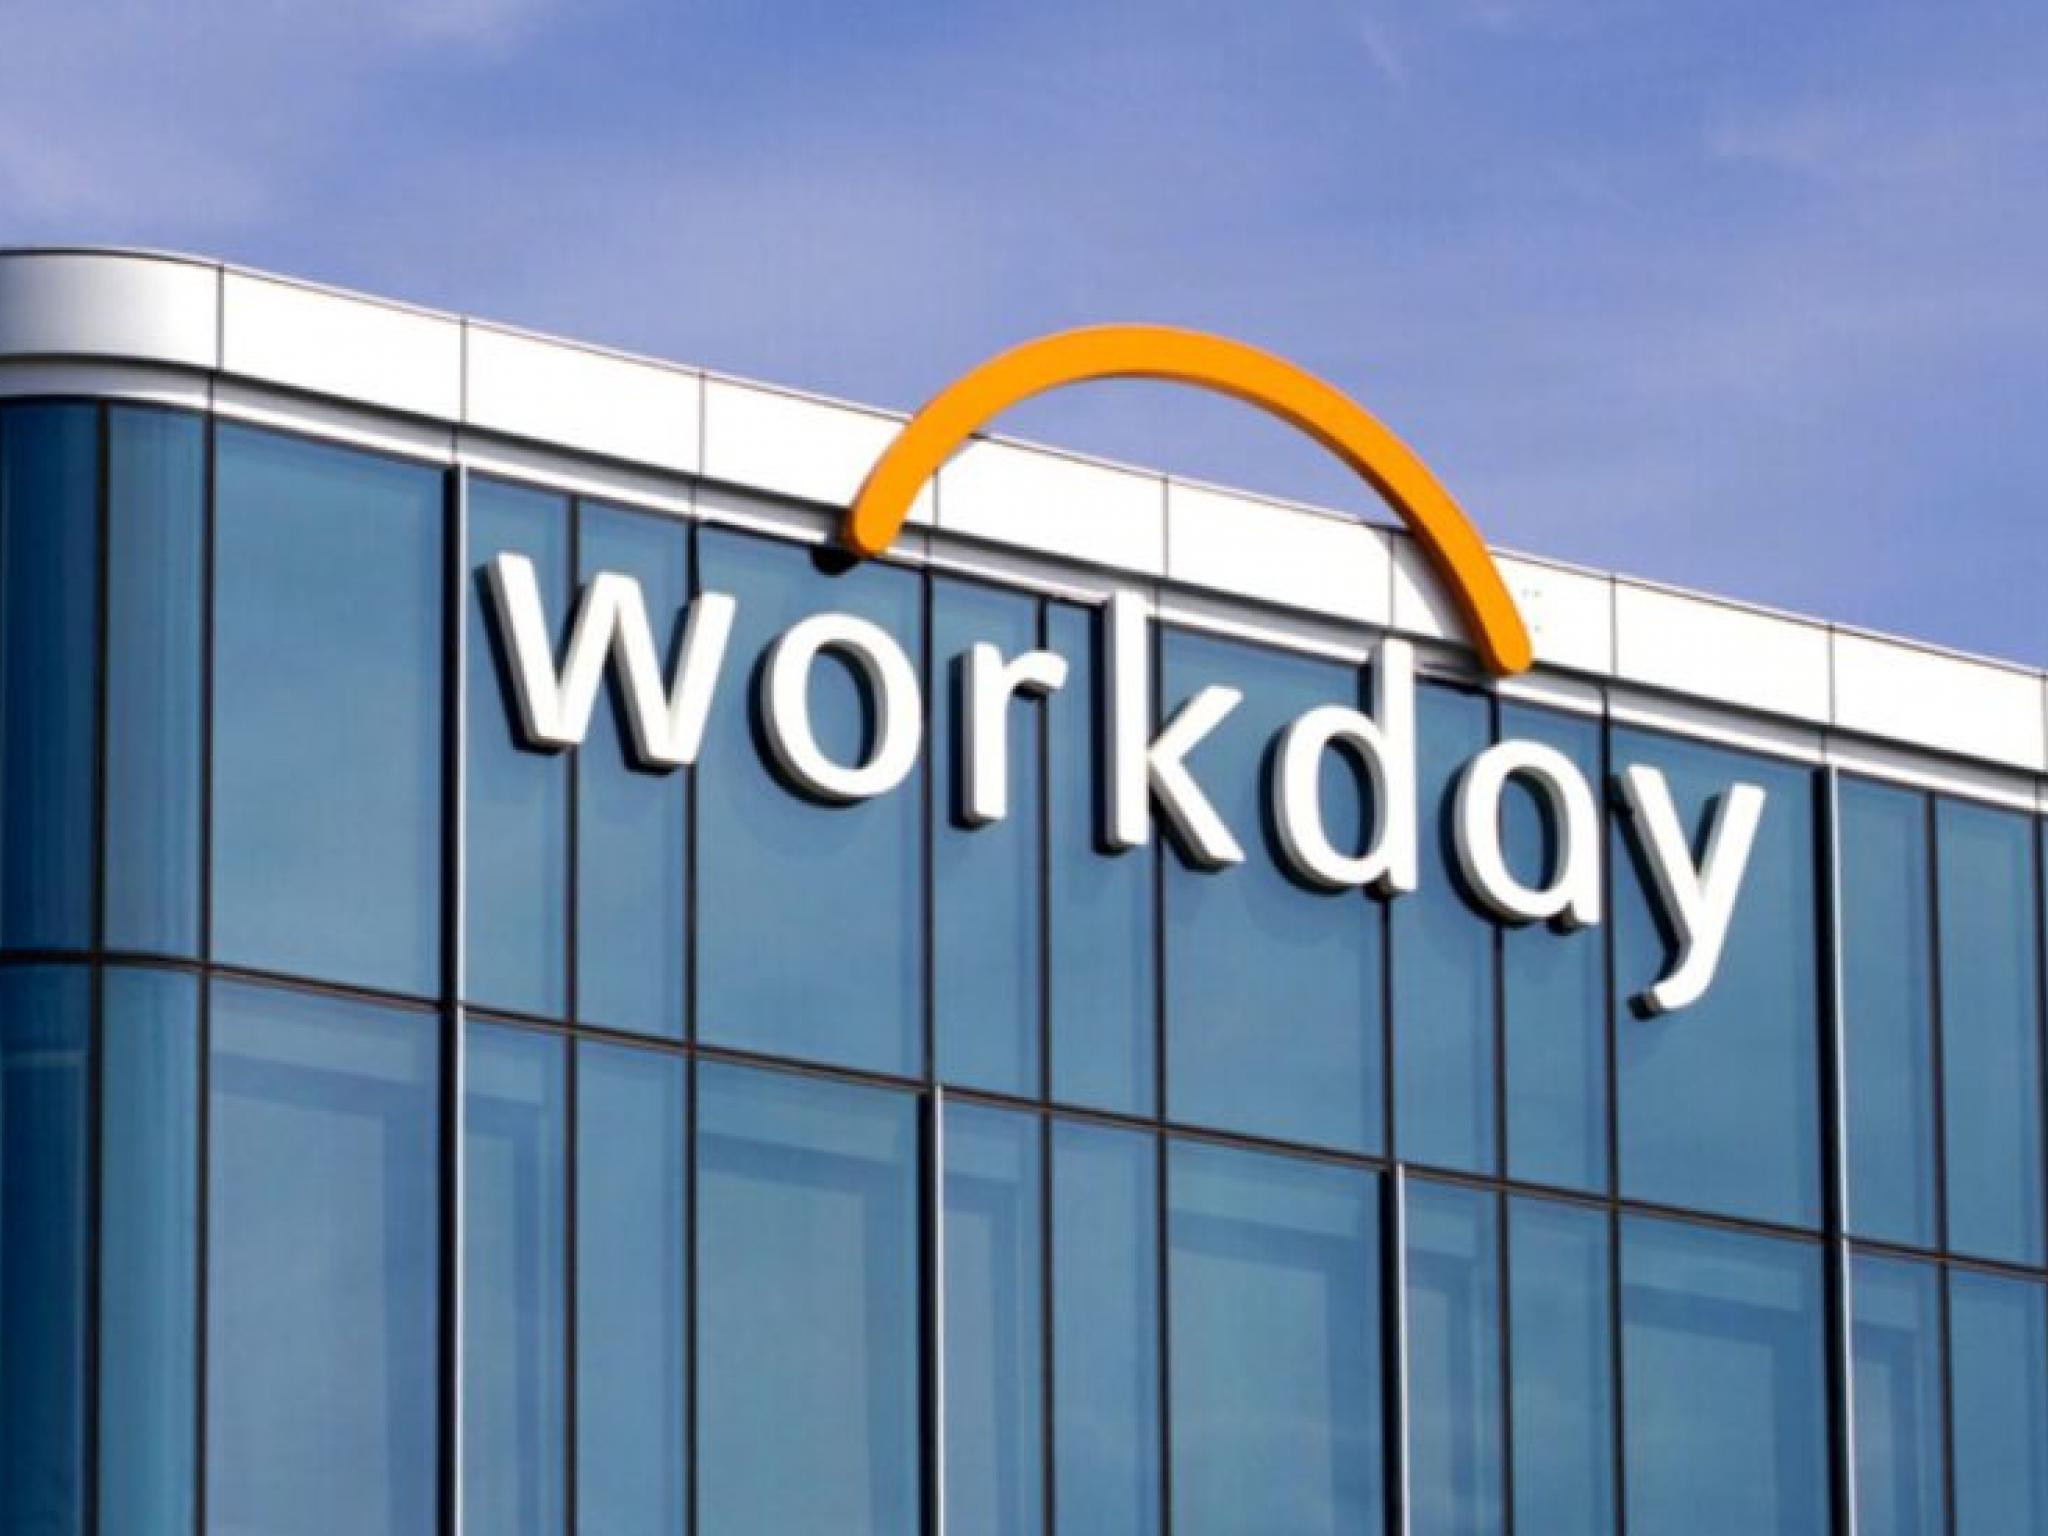  workday-to-rally-over-52-here-are-10-top-analyst-forecasts-for-thursday 